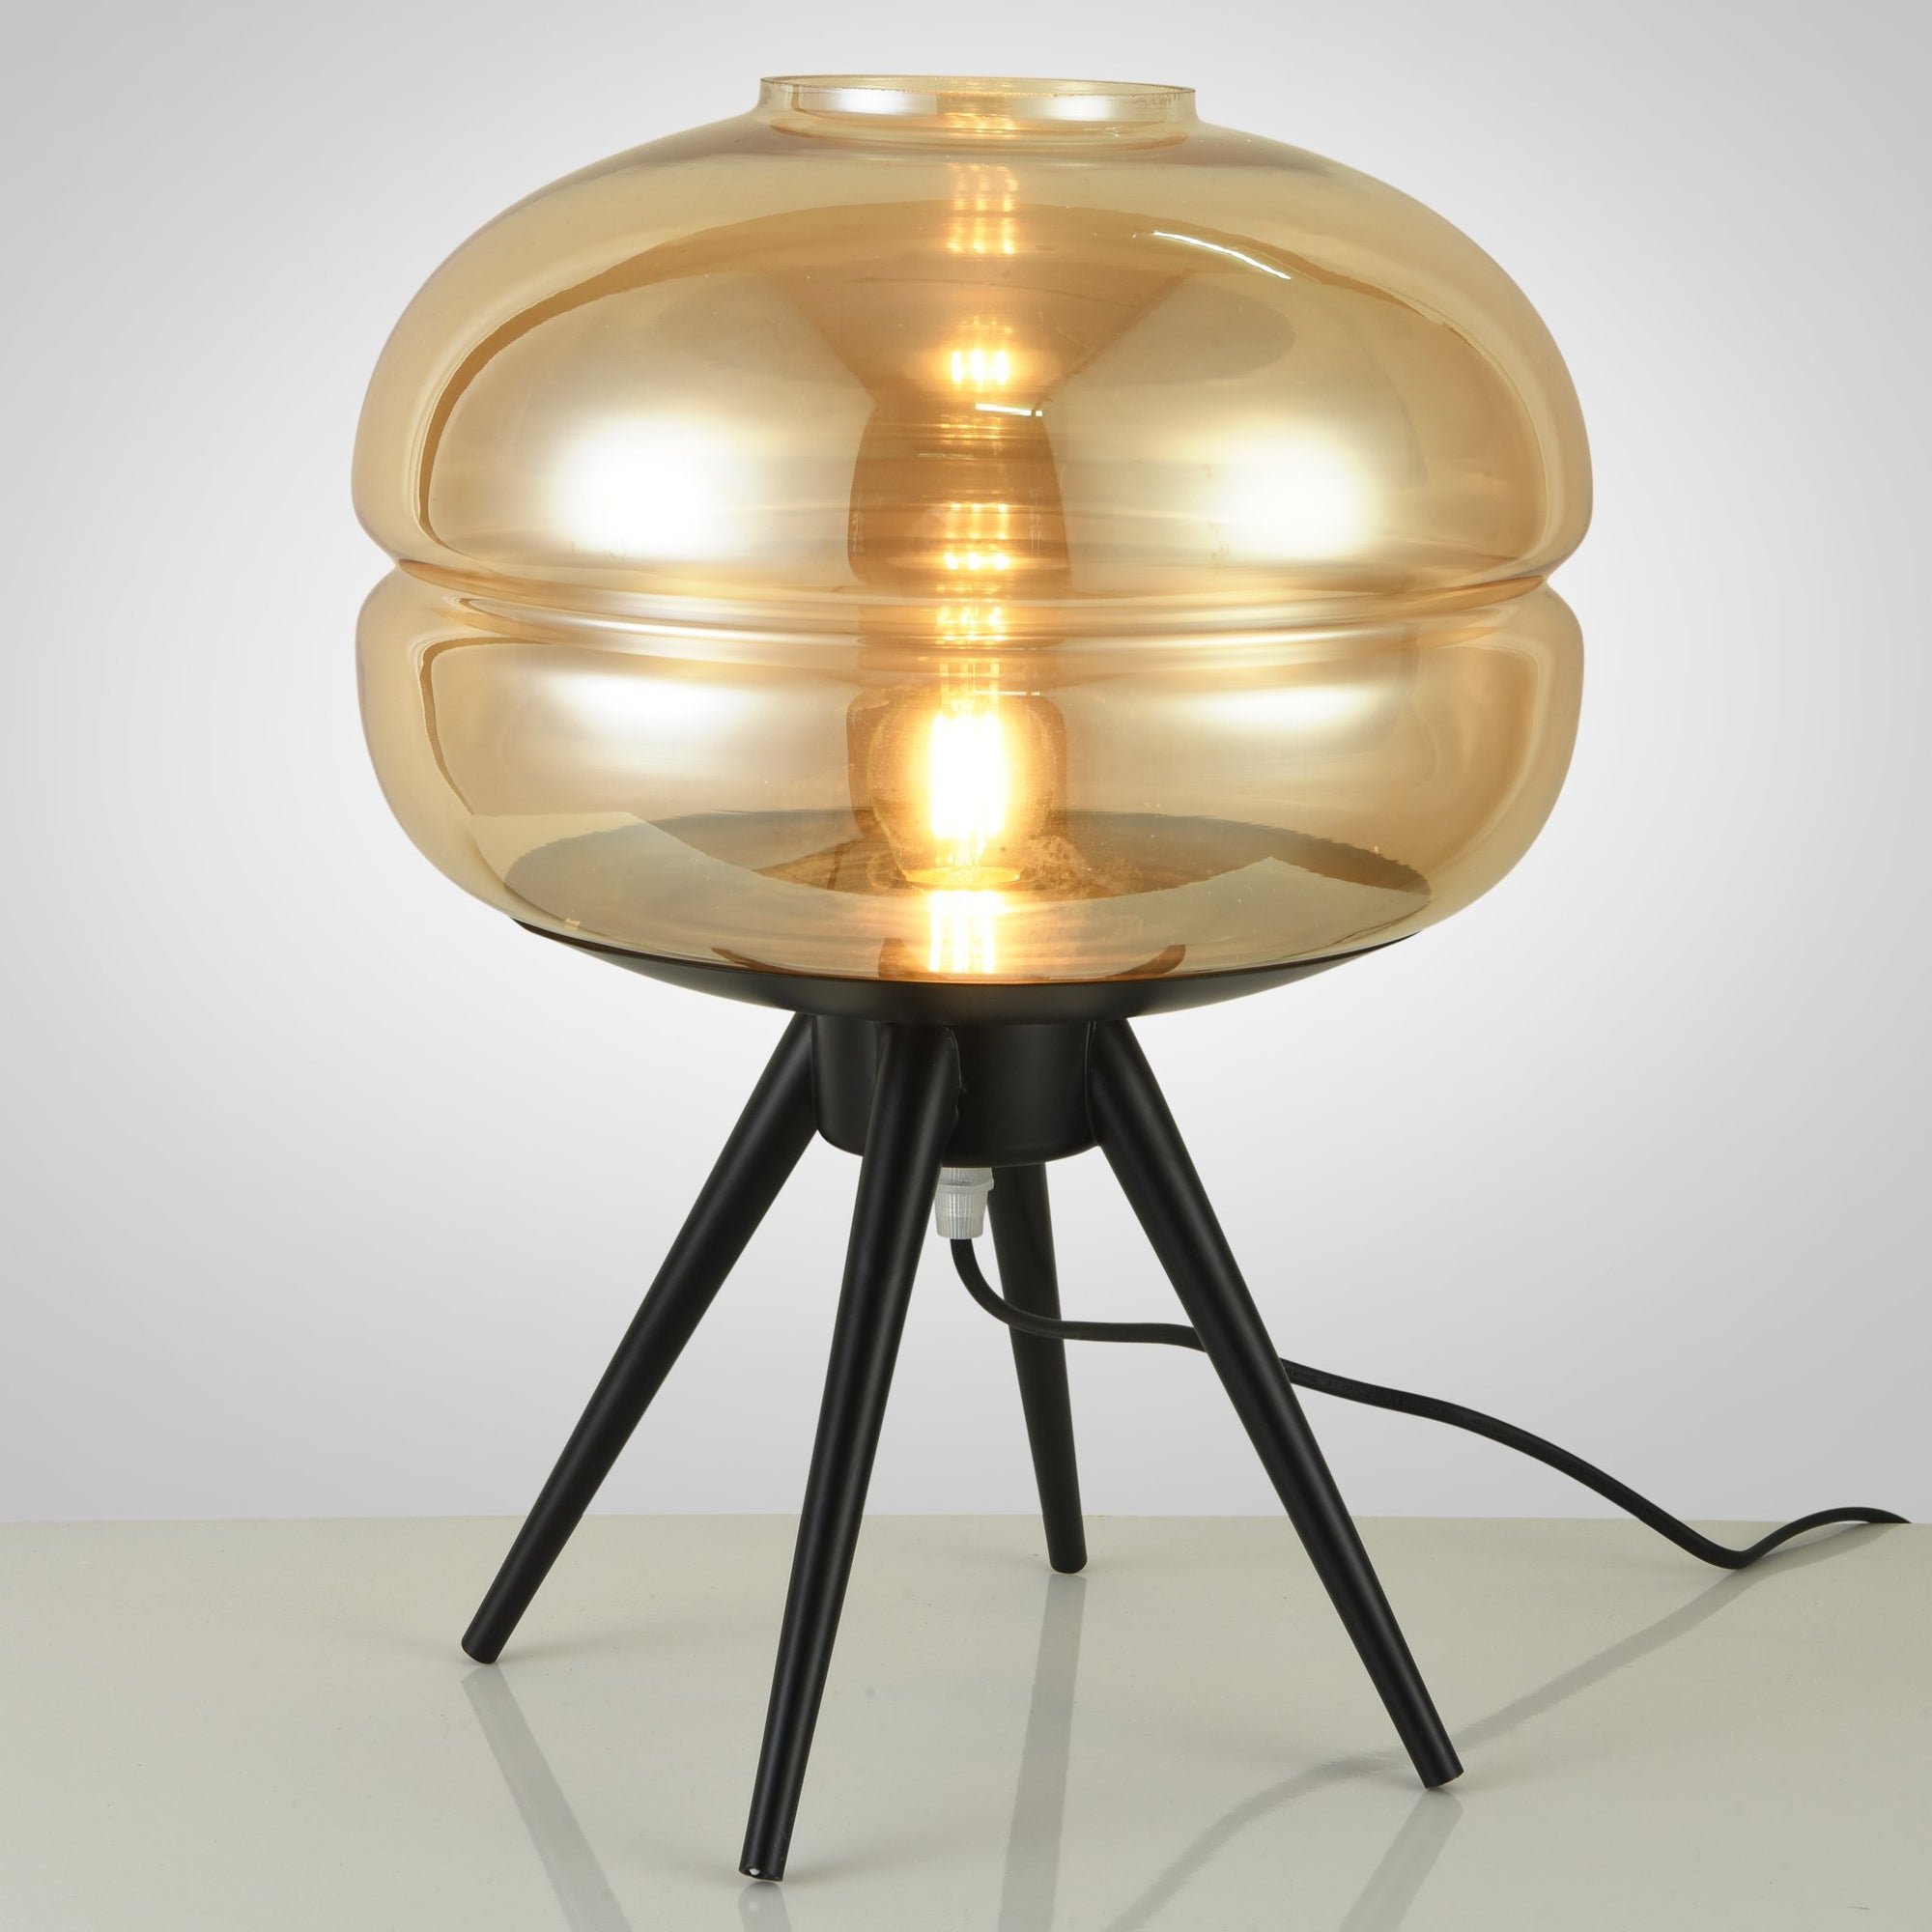 Buy Relations Table Lamp Online